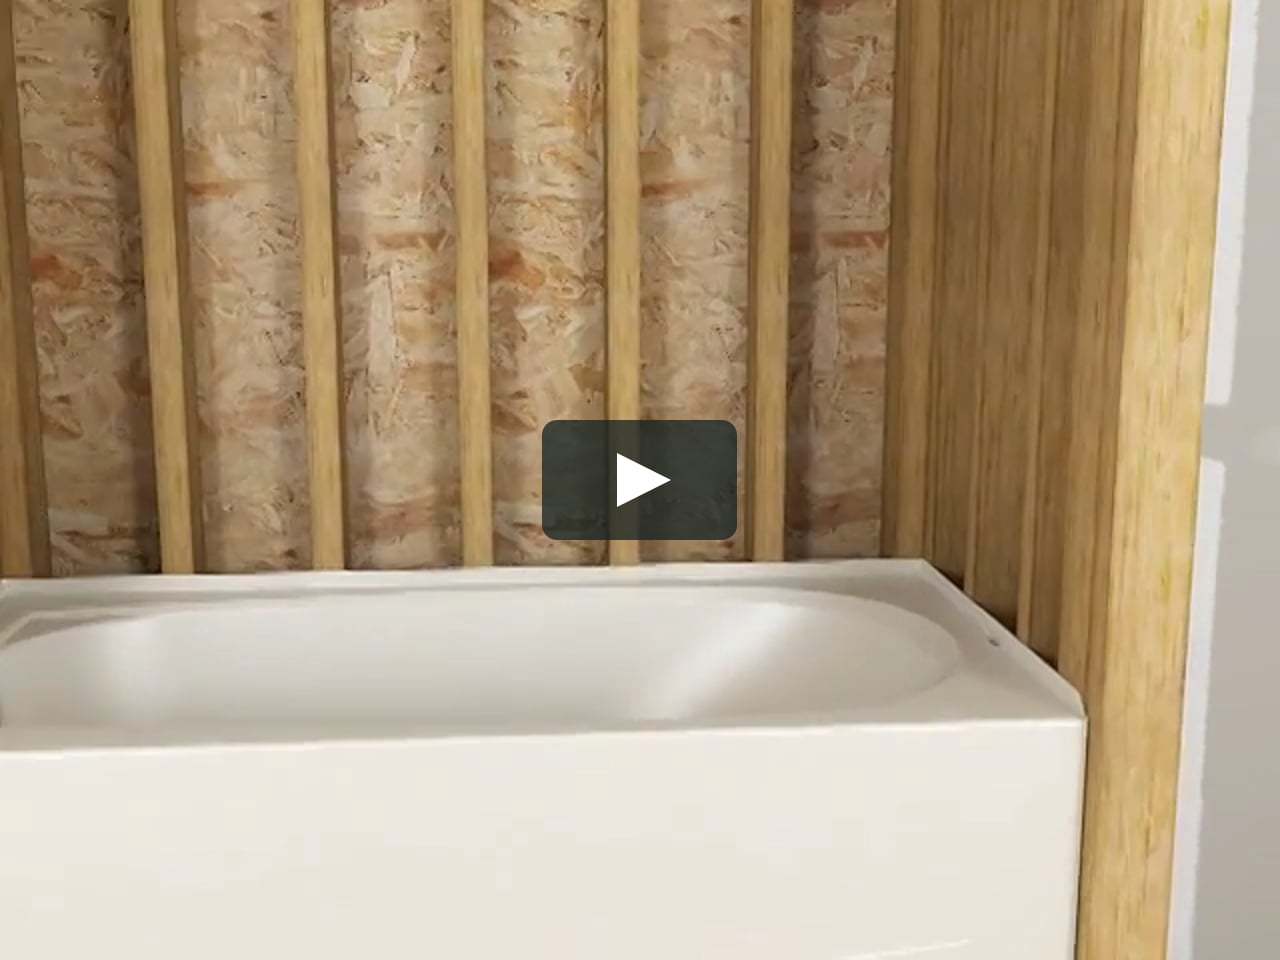 Sc Installation Sterling Performa Or, Sterling All Pro Bathtub